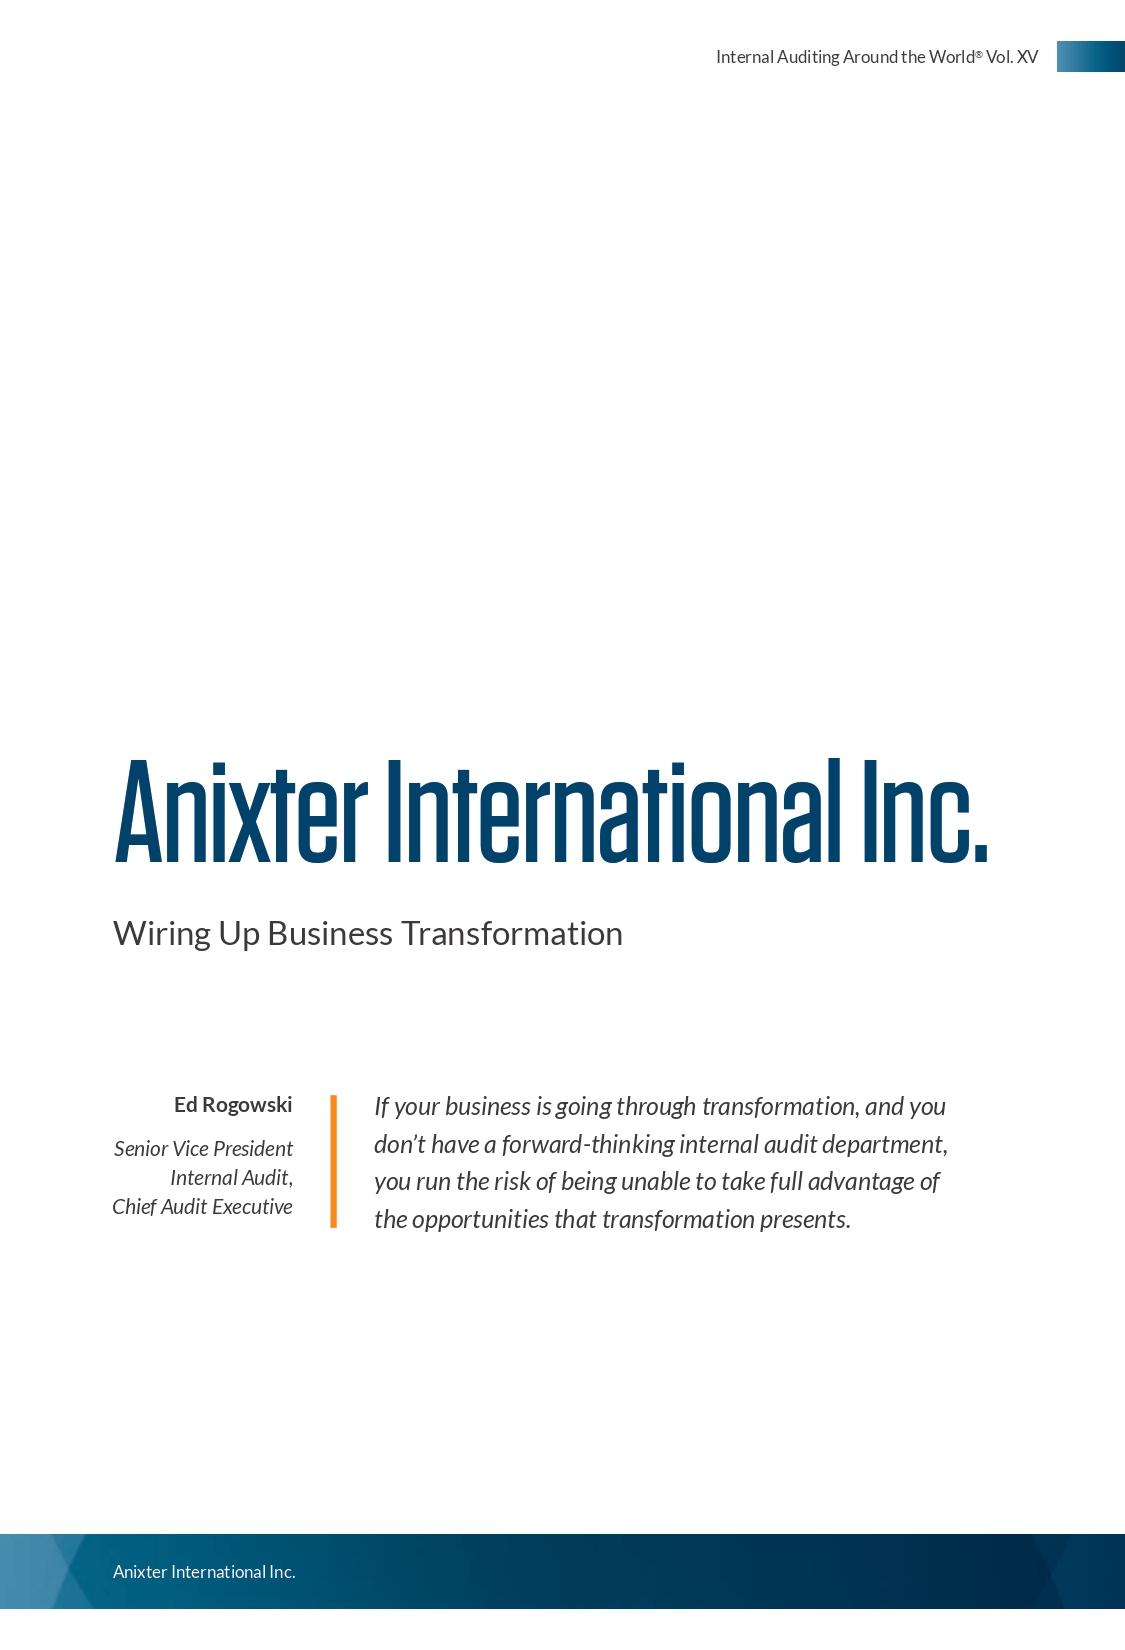 Screenshot of the first page of Anixter International Inc. Wiring Up Business Transformation